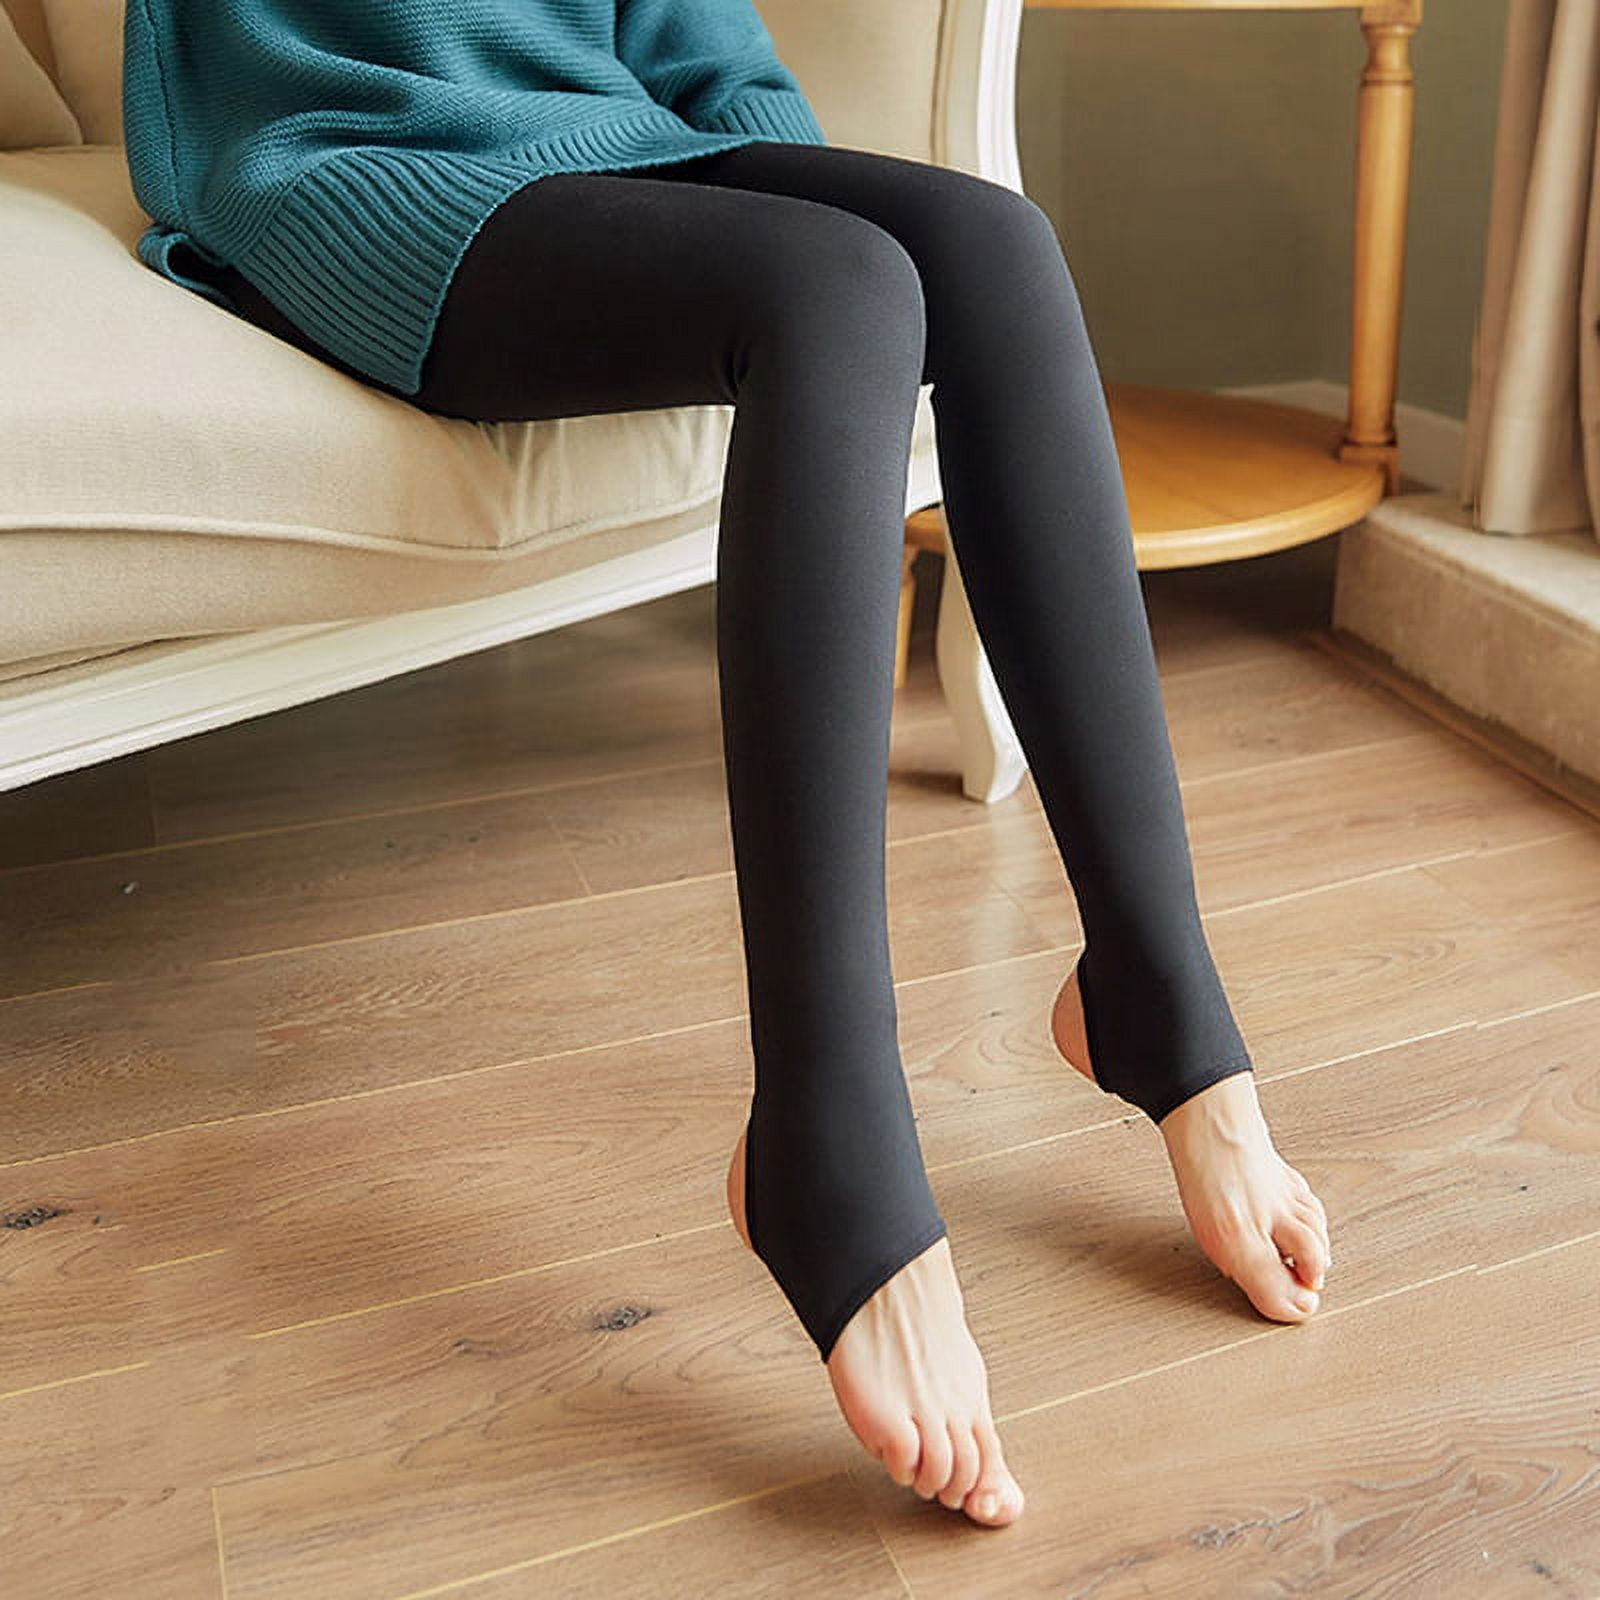 Winter Warm Fleece Pantyhose Lined Natural Skin Color Leggings Slim  Stretchy Tights for Women Outdoor Black Skin With Feet 80 Grams 